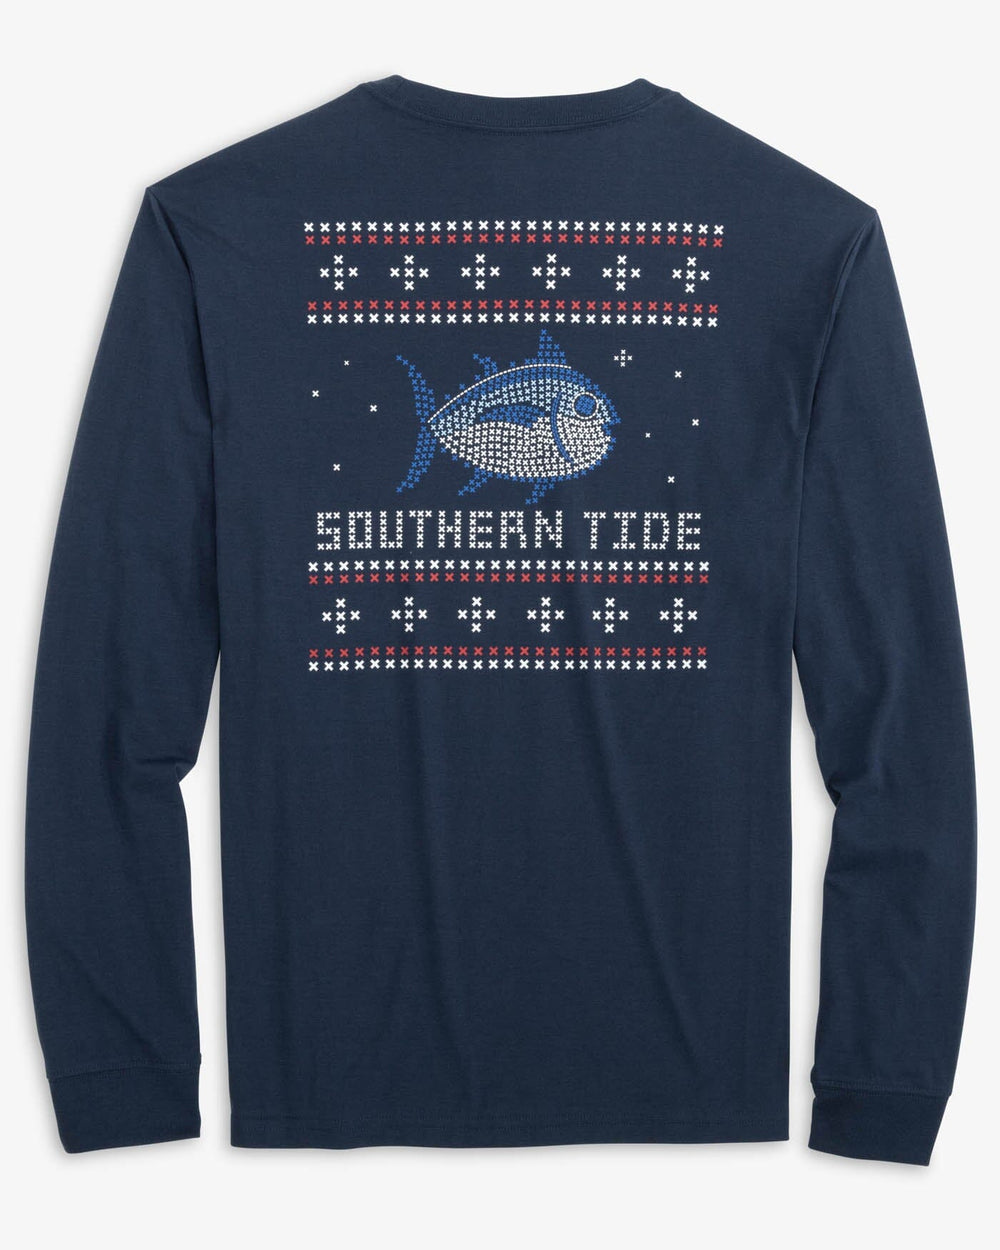 The back view of the Southern Tide Fair Isle Skipjack Long Sleeve T-shirt by Southern Tide - True Navy